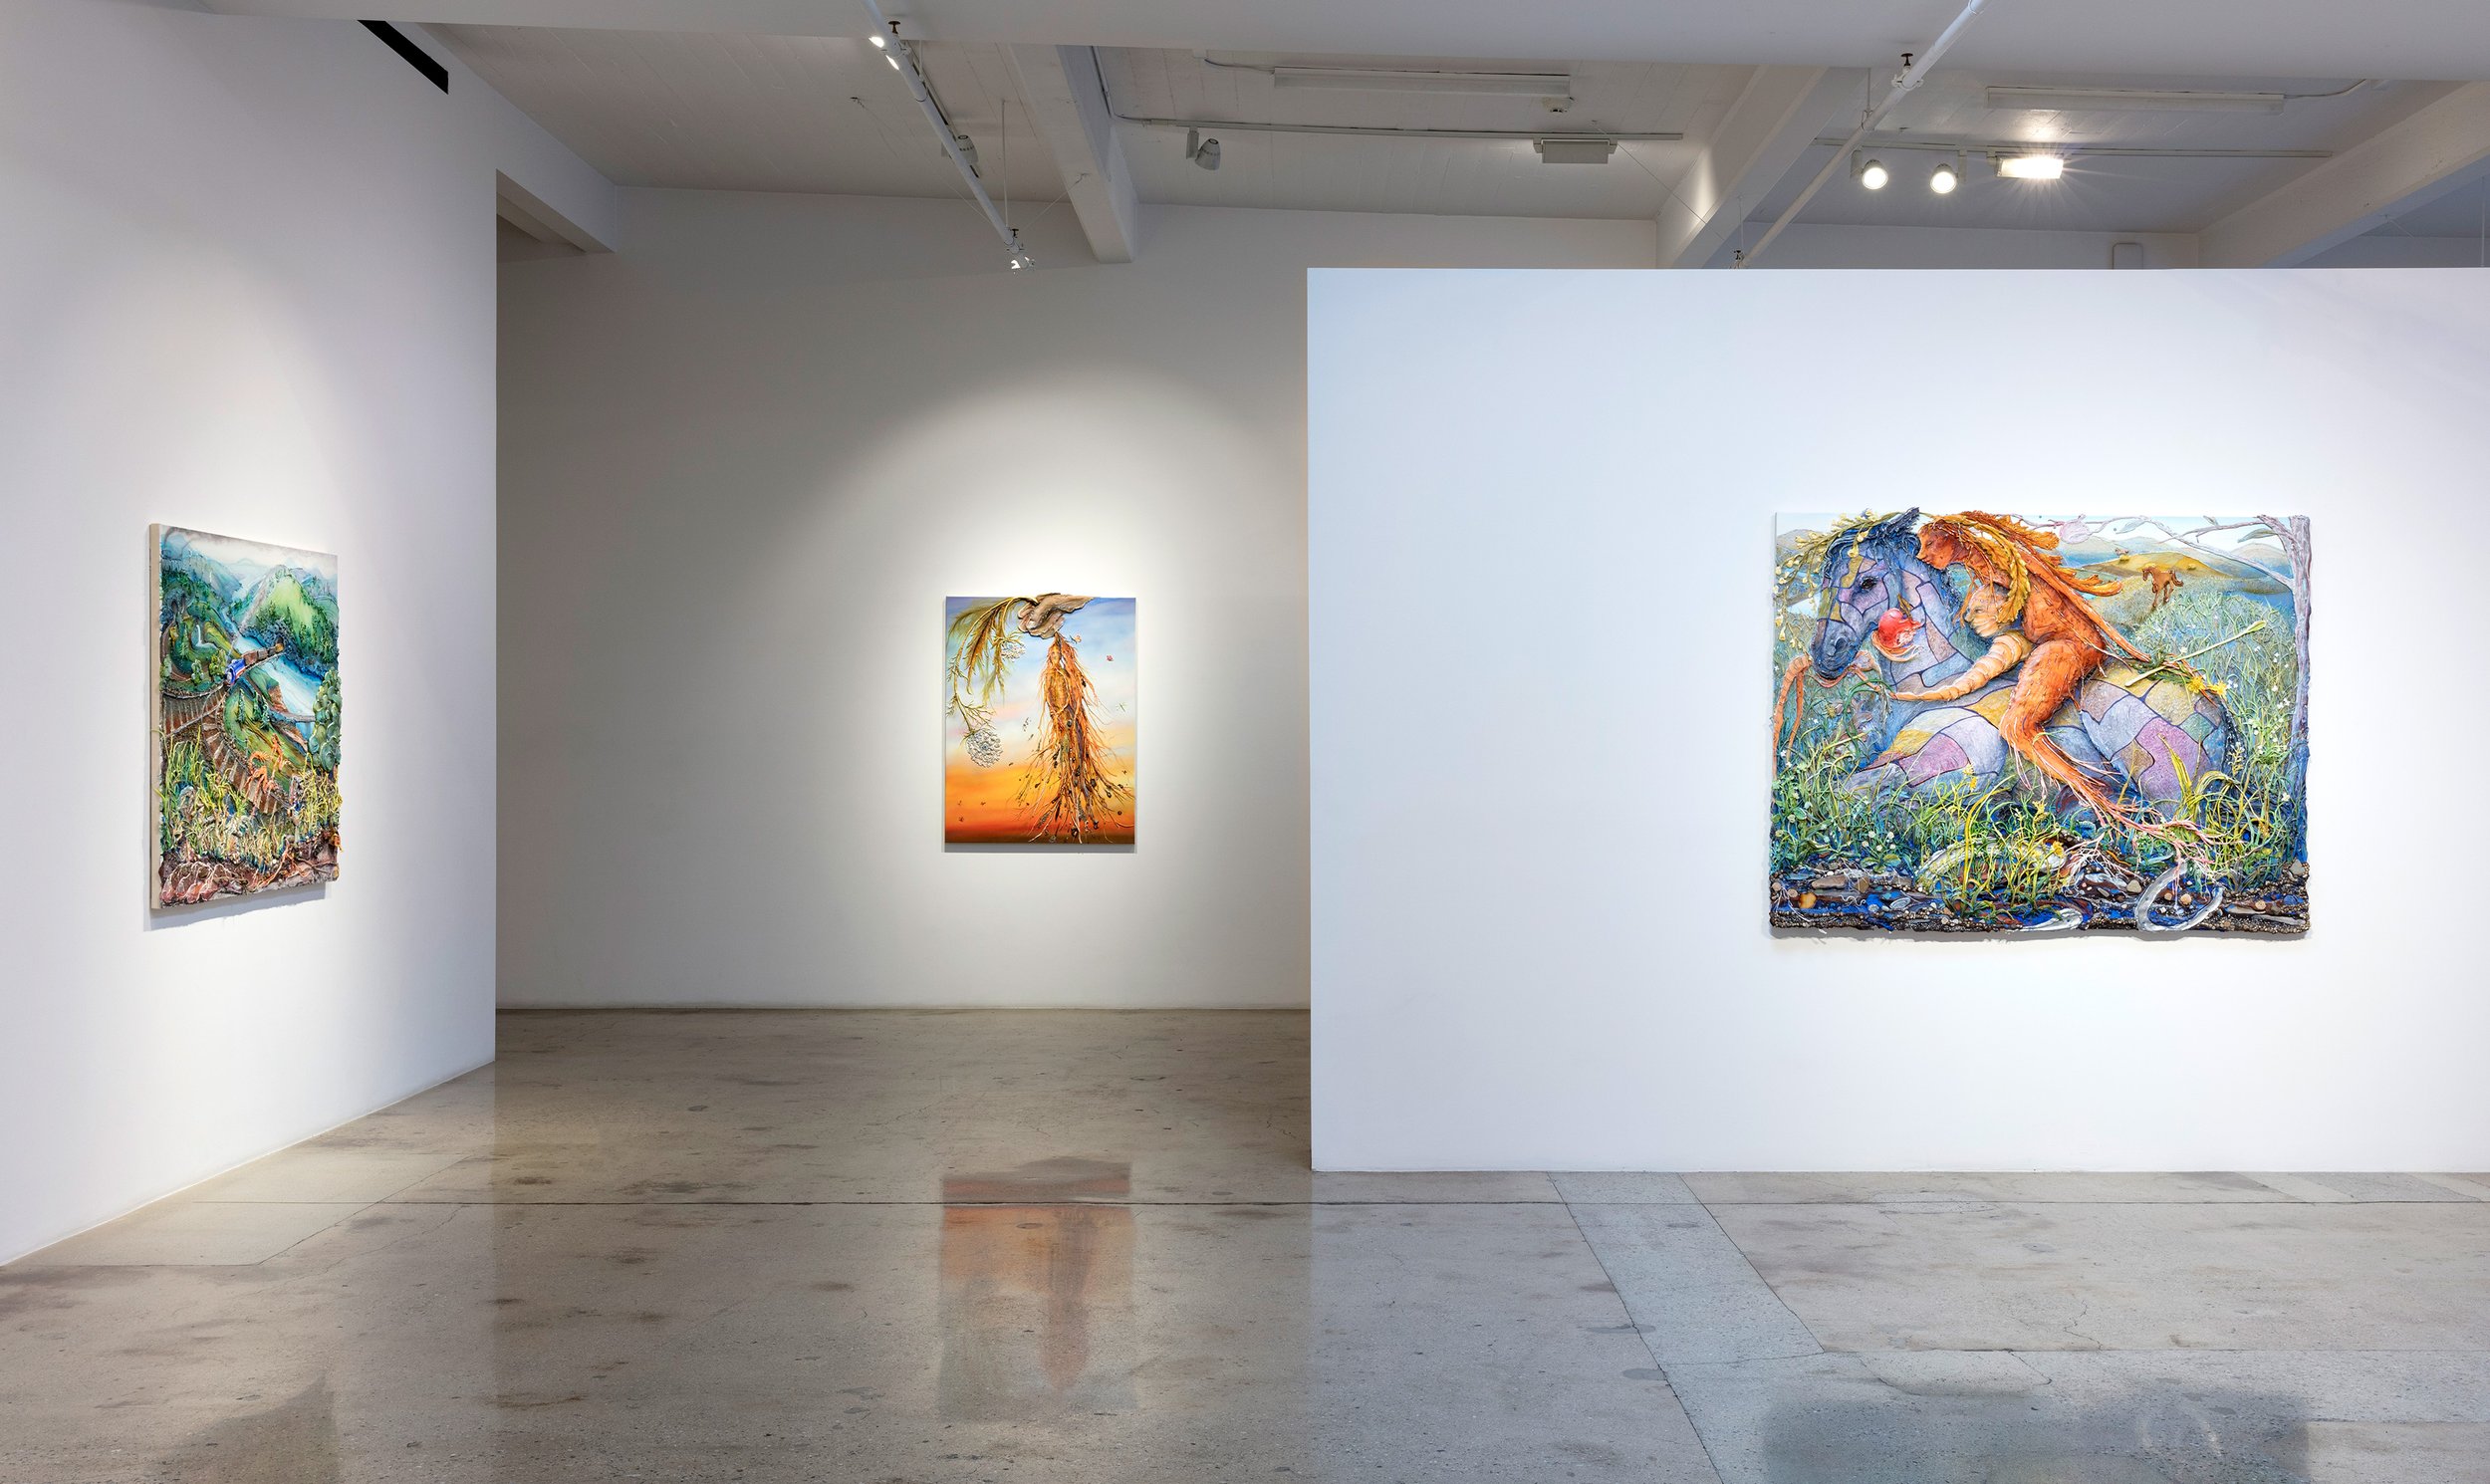  Installation view from “Unseen Animal” at Steve Turner, 2022, Los Angeles, California.  